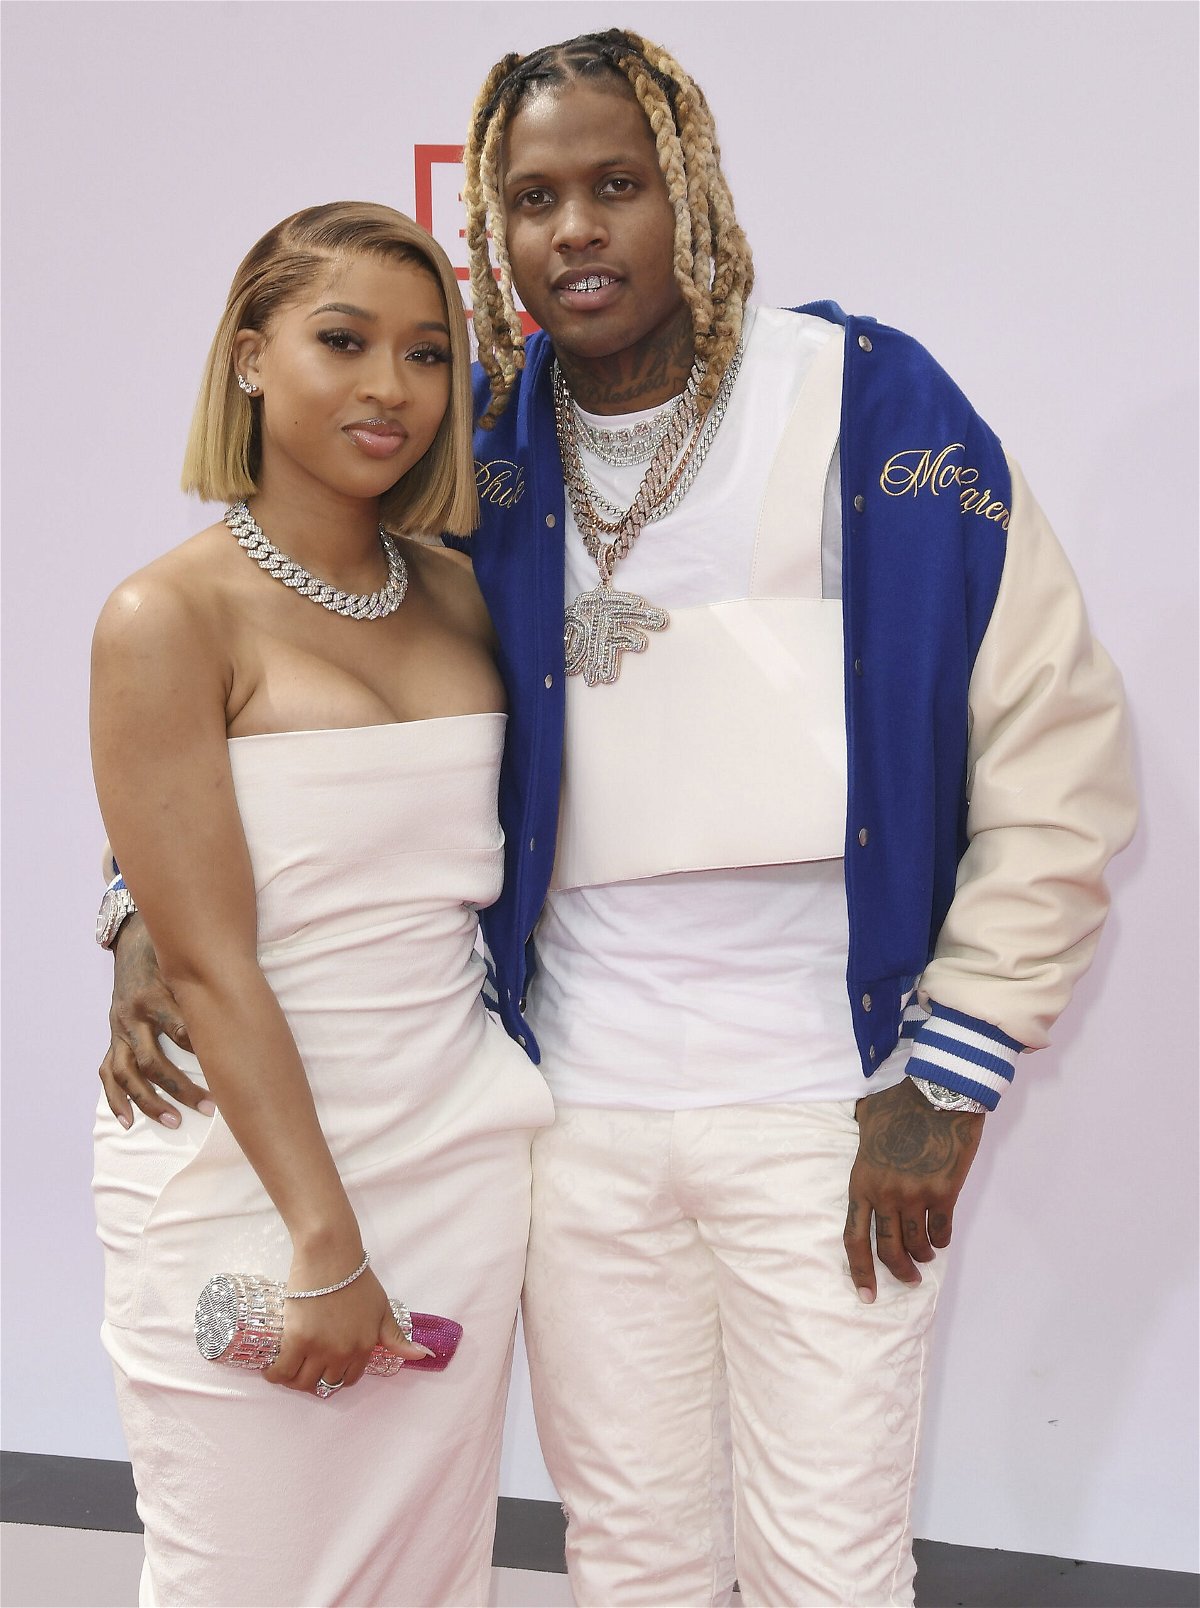 Lil Durk proposes during concert